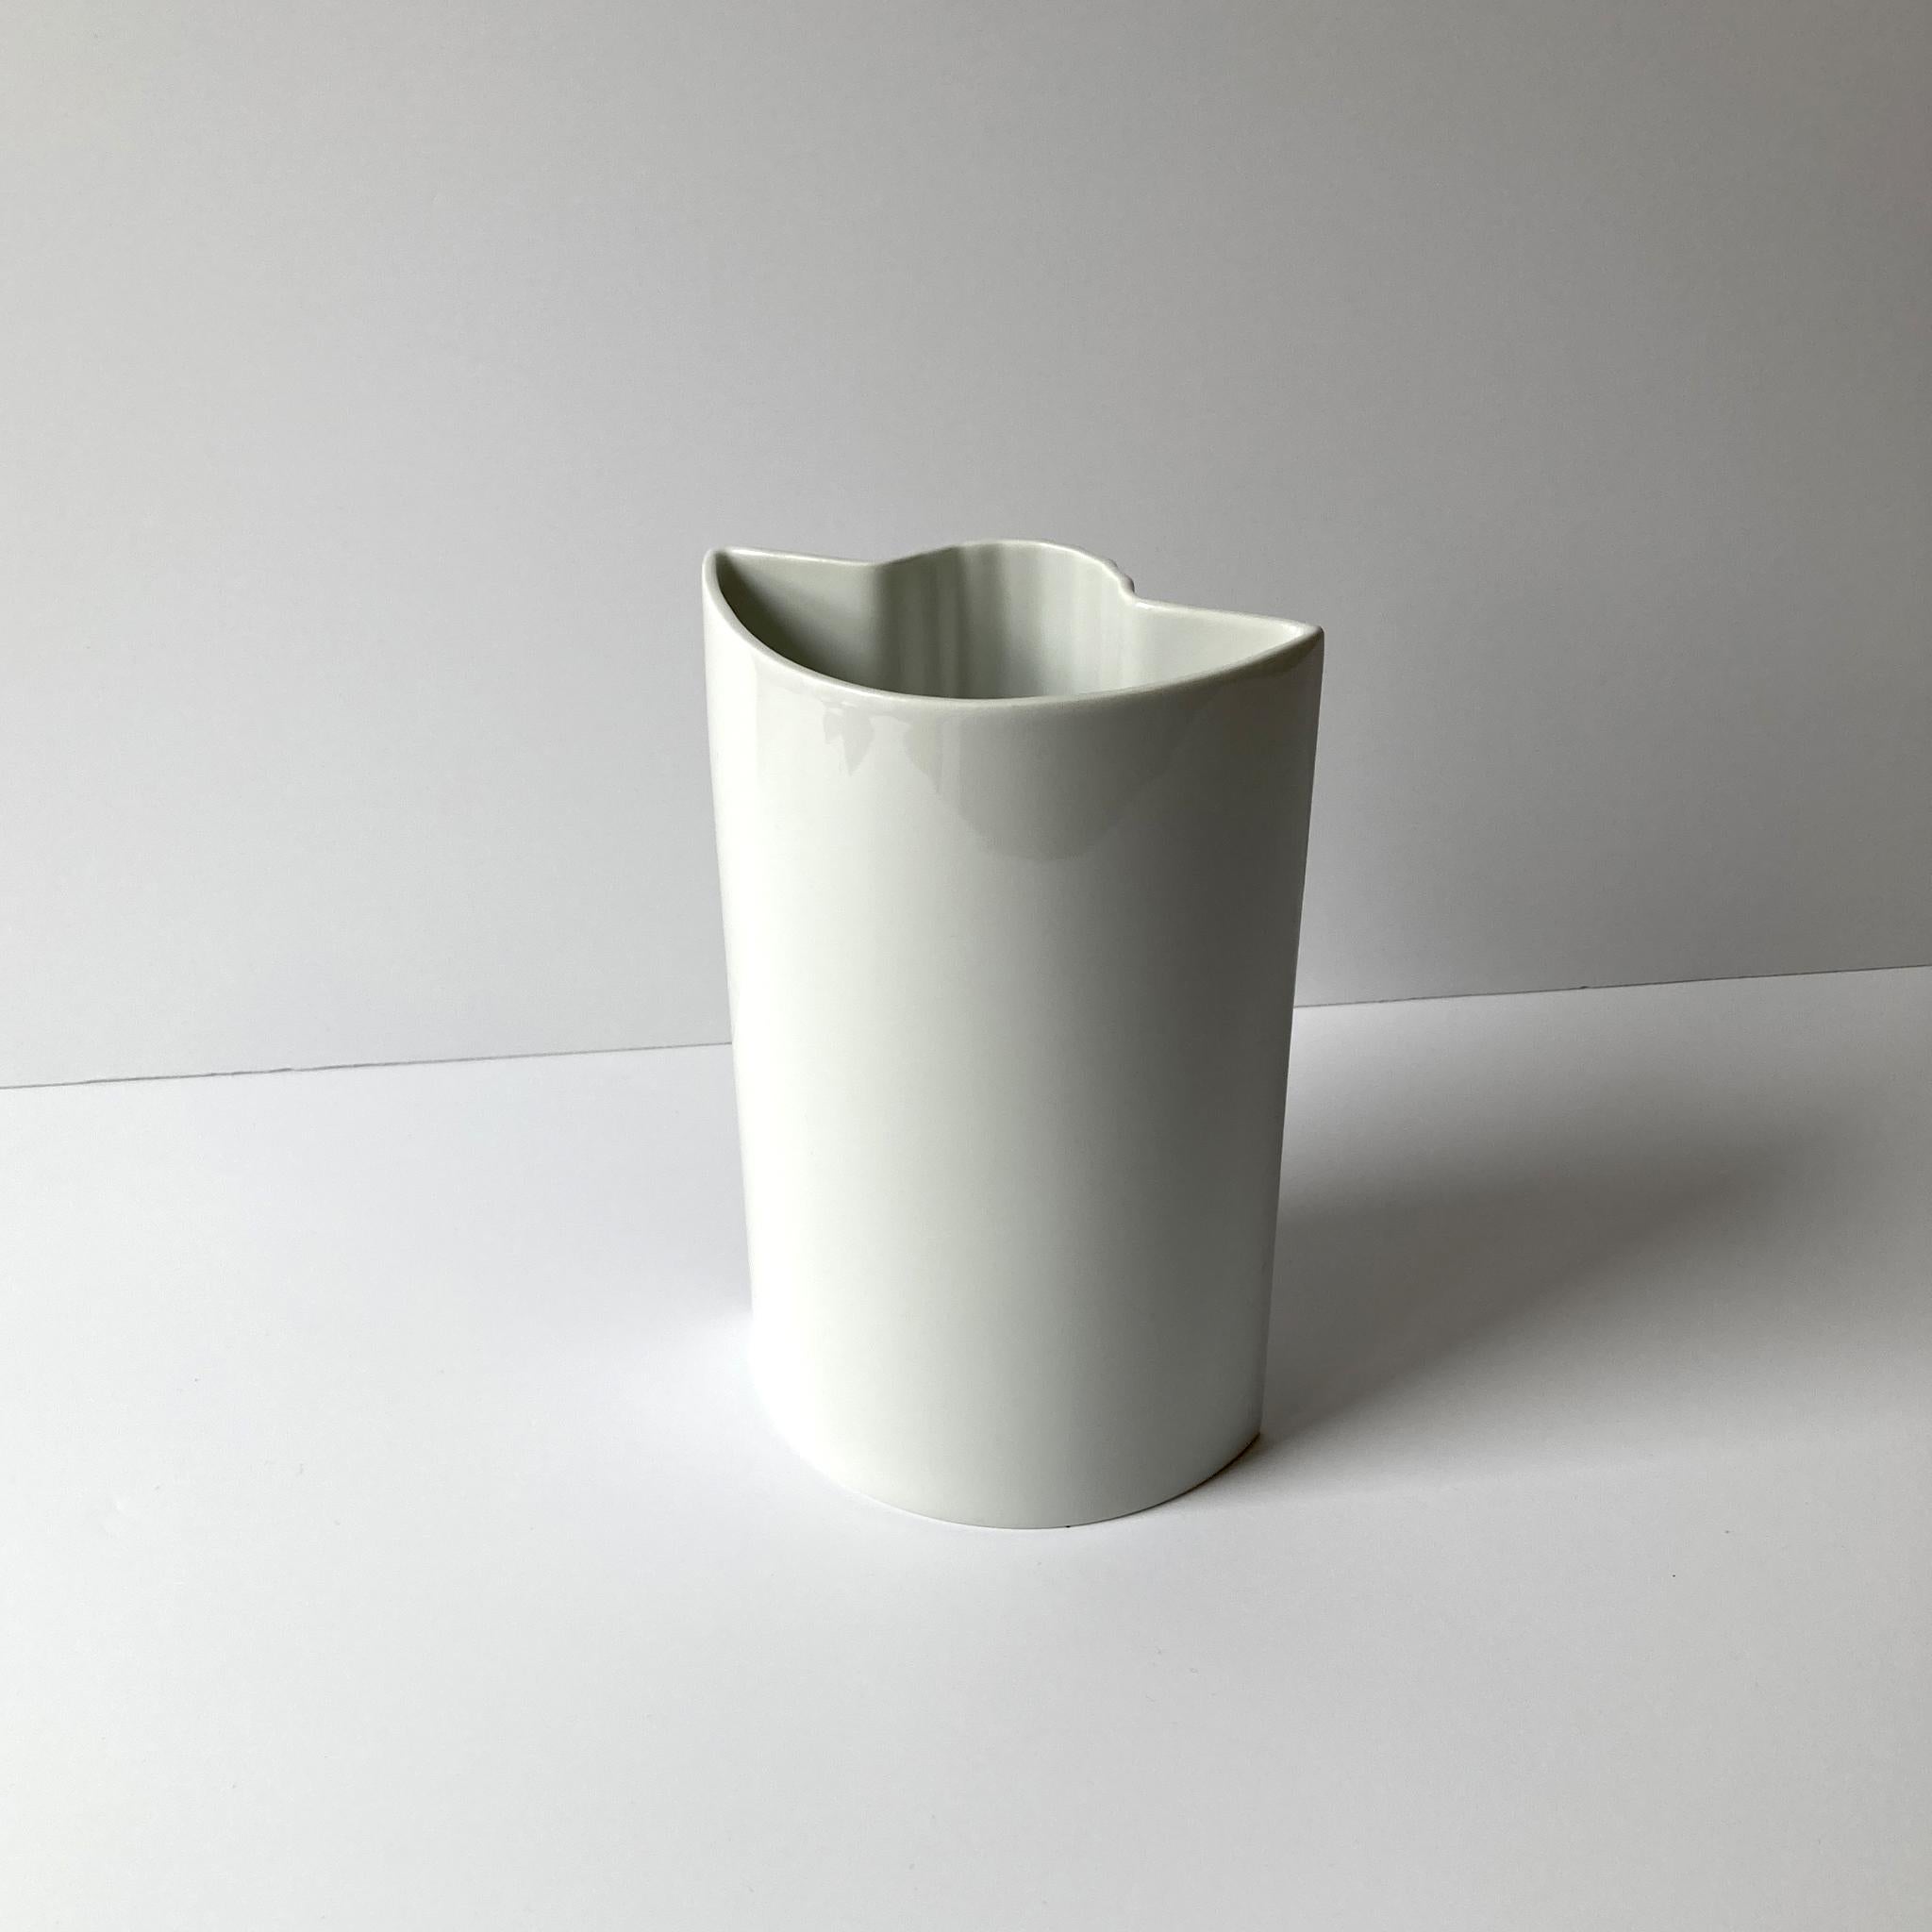 Rosenthal and Thomas Keramik White Porcelain Vases, Pair of Two For Sale 4